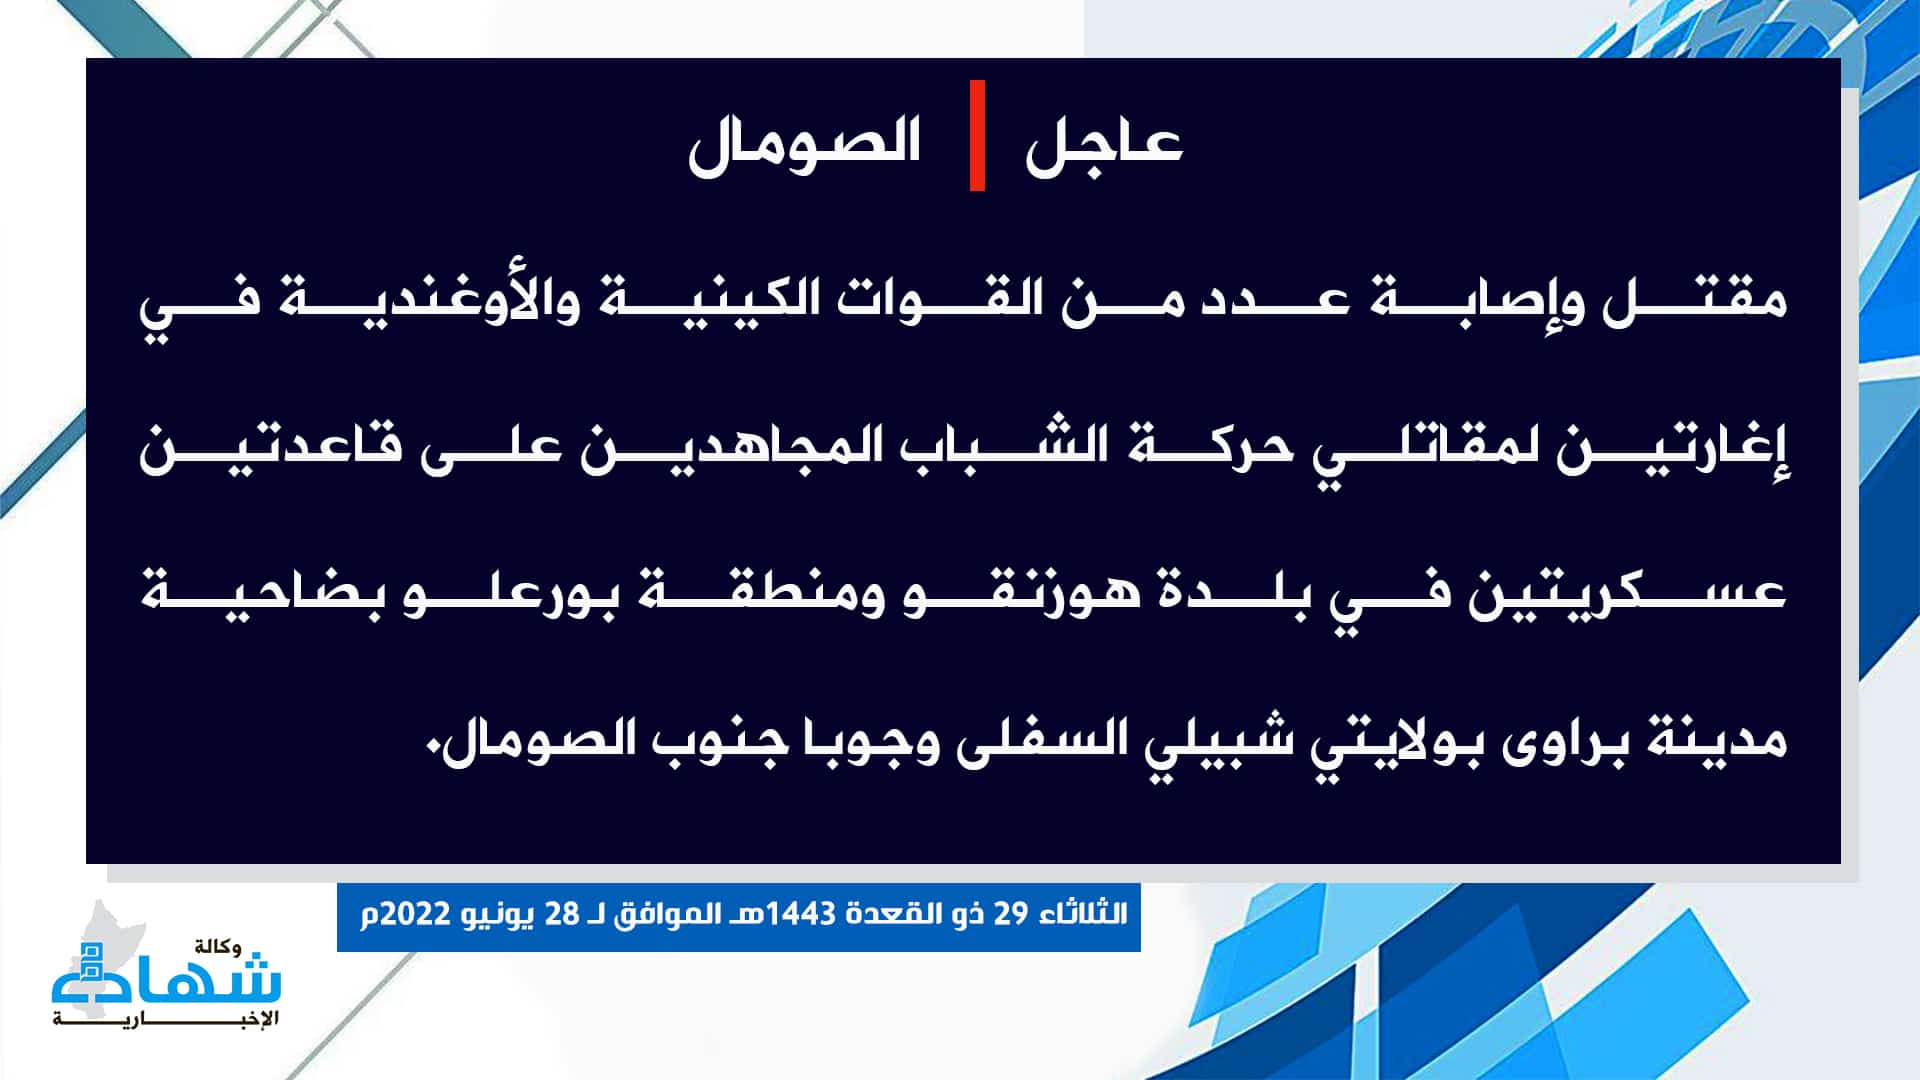 (Claim) al-Shabaab: Several Ugandan and Kenyan Forces Were Killed and Injured on Two Military Bases in Hozingo Town and Bor'alo District, Barawi City, Lower Shabelle and Juba States, Southern Somalia - 28 June 2022